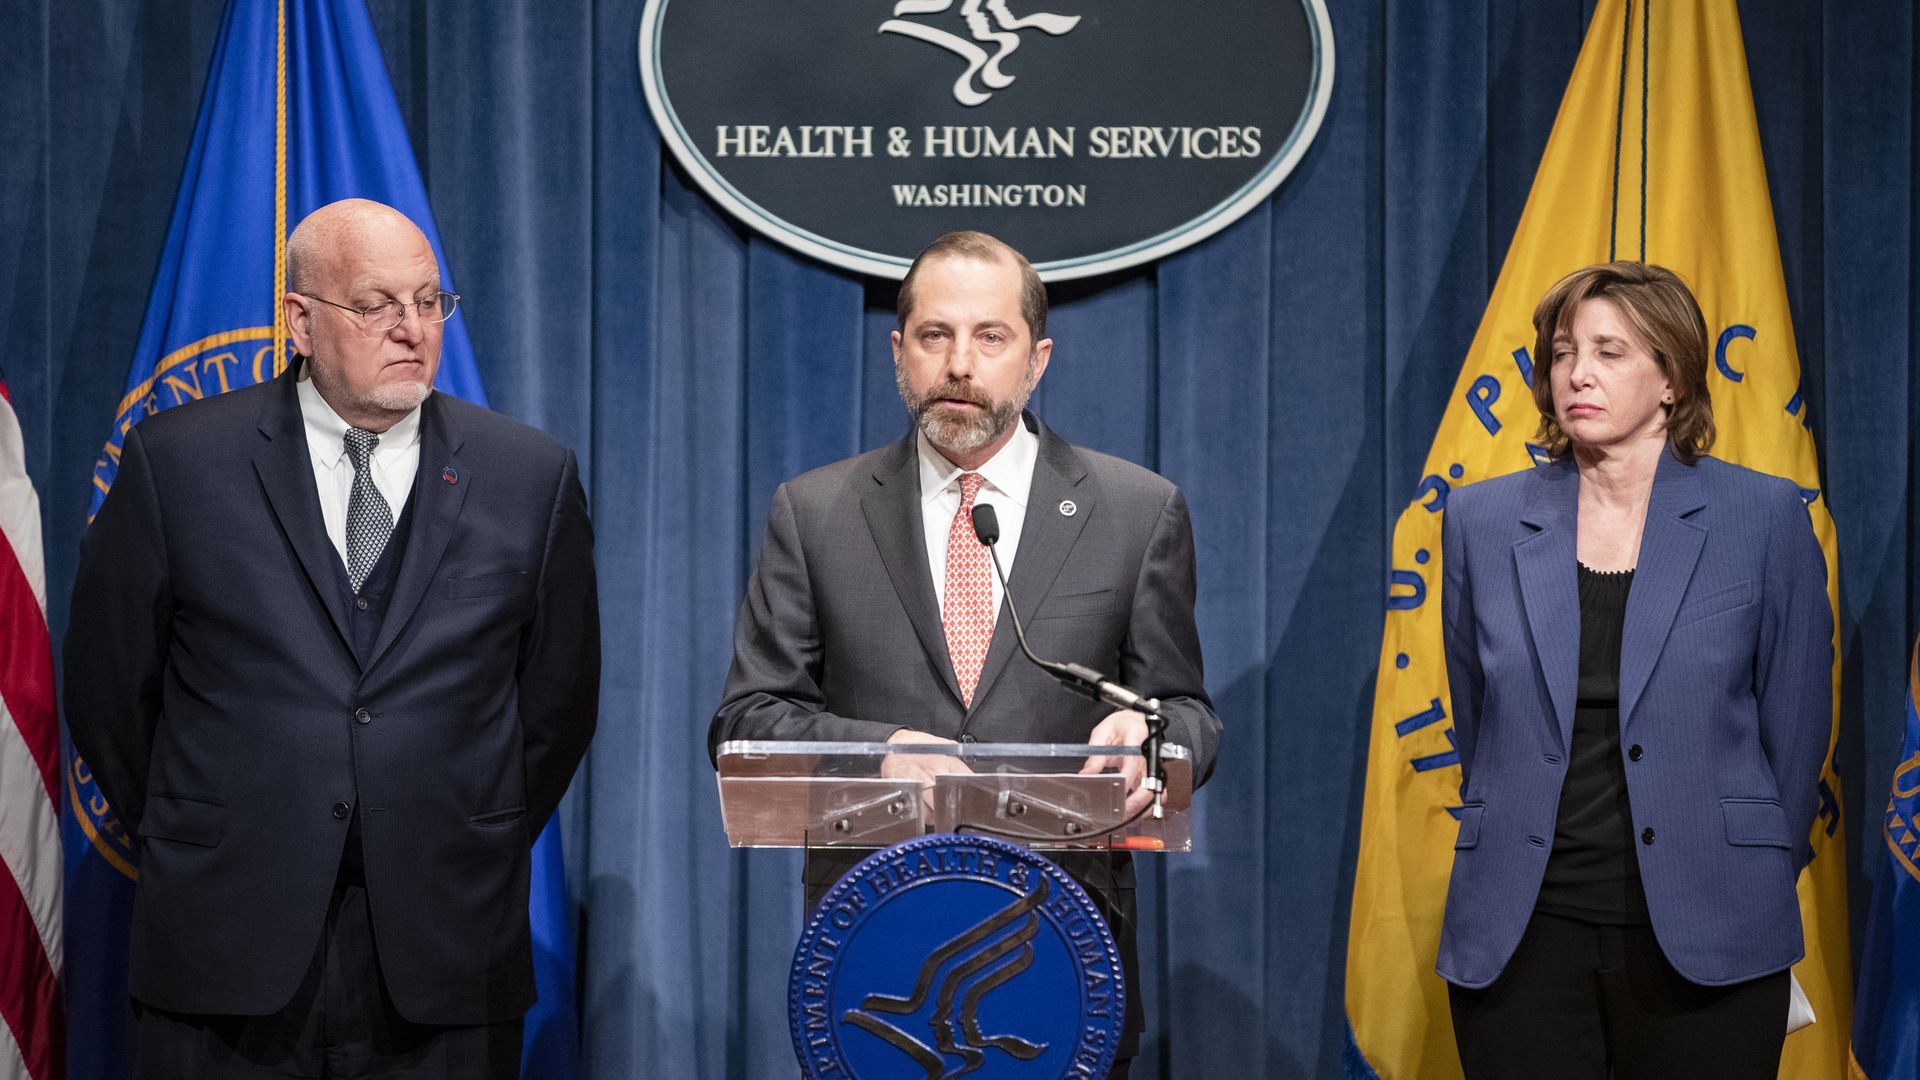 Health and human services with CDC arm